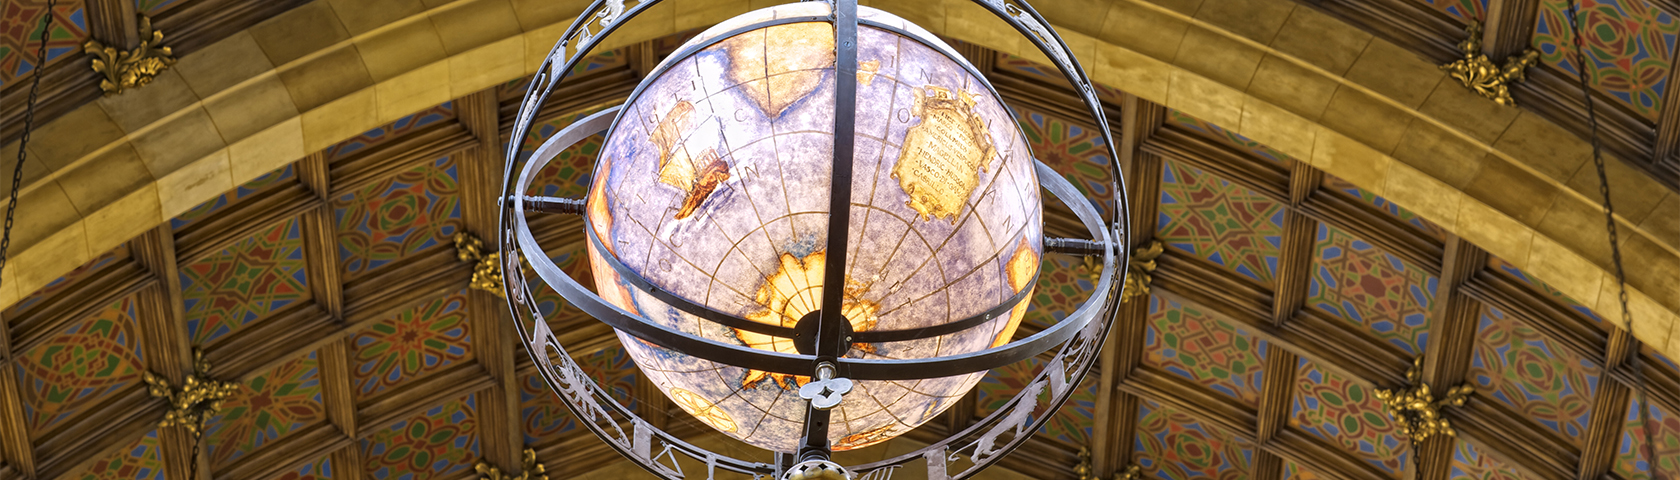 Room with a globe of the world. 